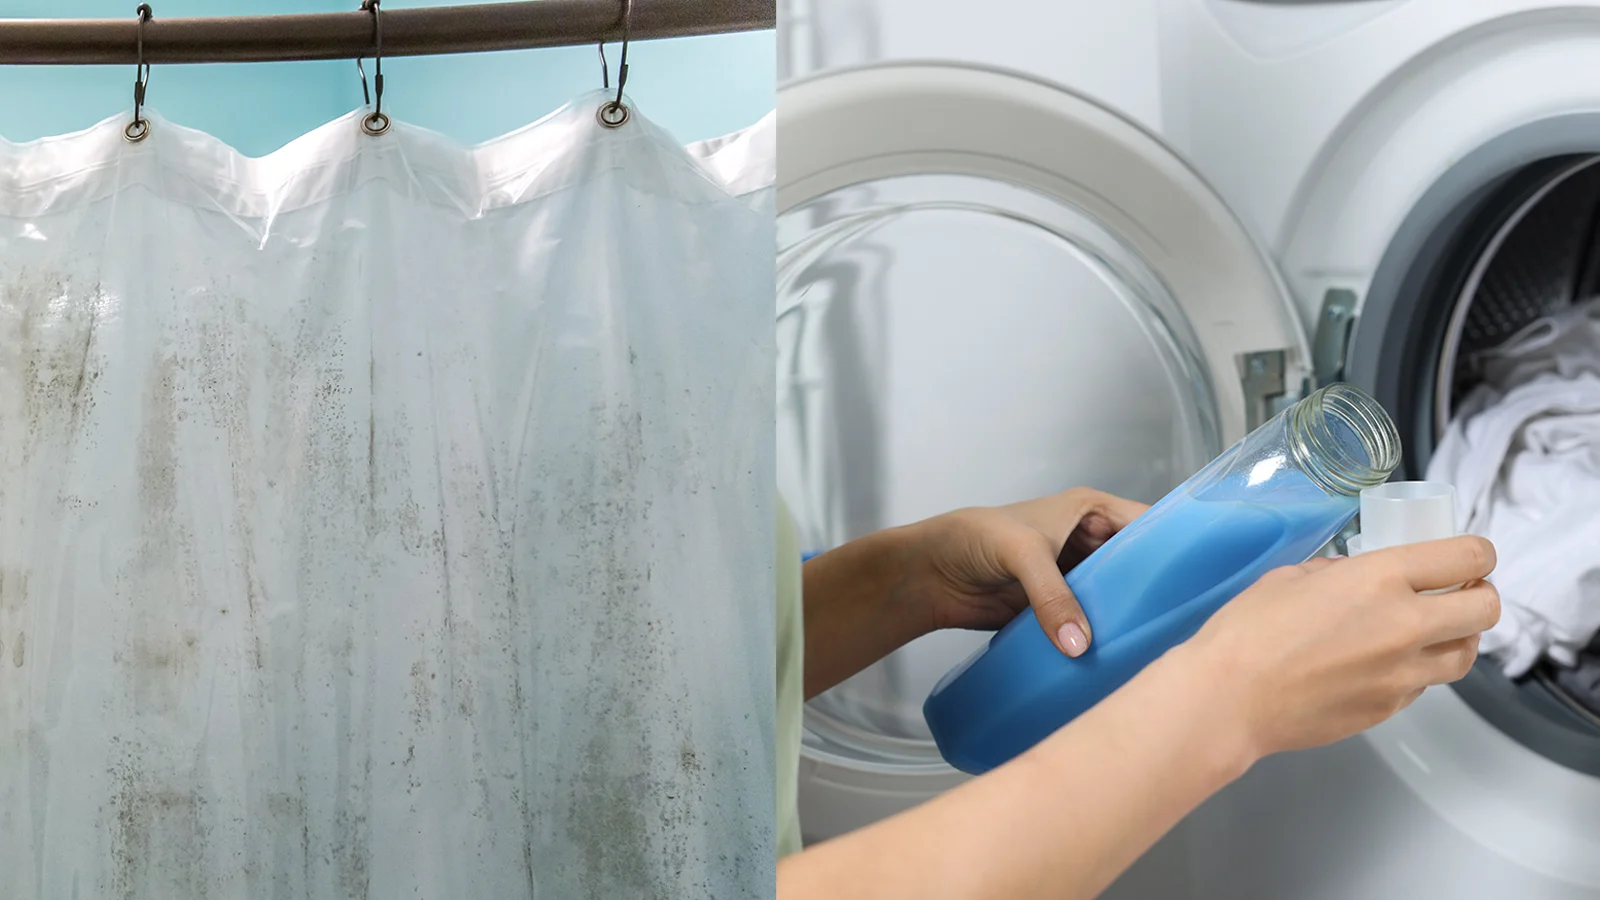 Are fabric shower curtain liners better than plastic? Two pictures of a woman washing clothes in a washing machine.